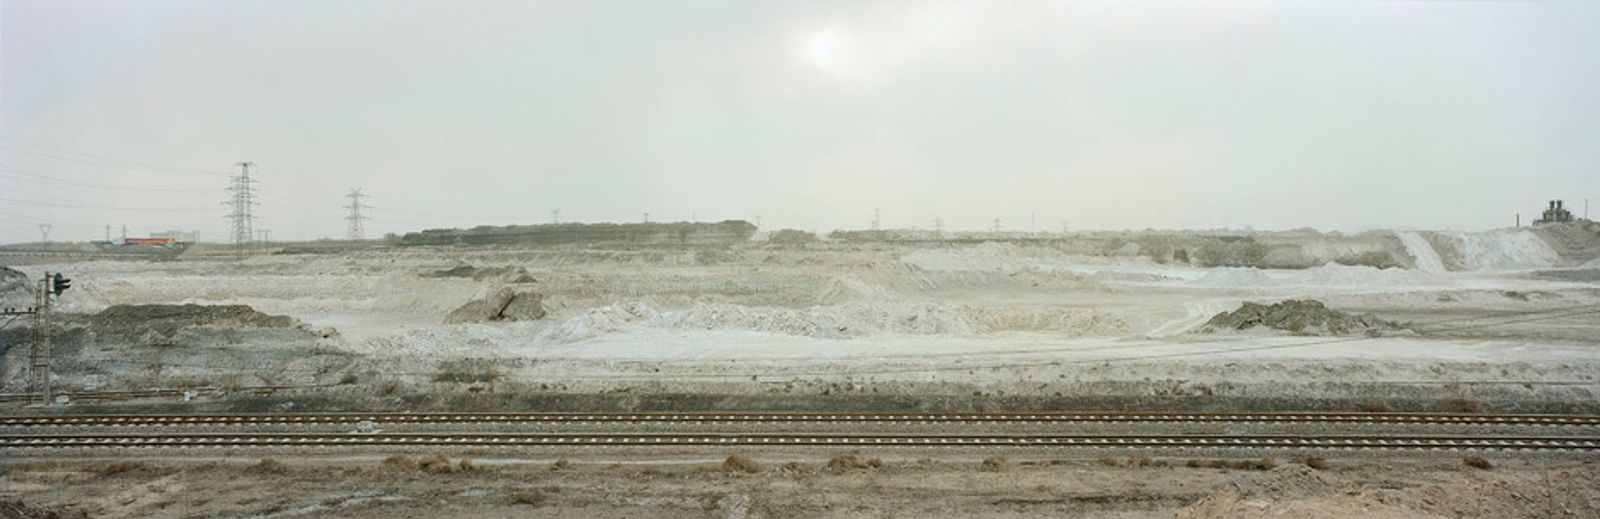 © Ian Teh - Image from the Traces : Landscapes in transition on the Yellow River Basin photography project